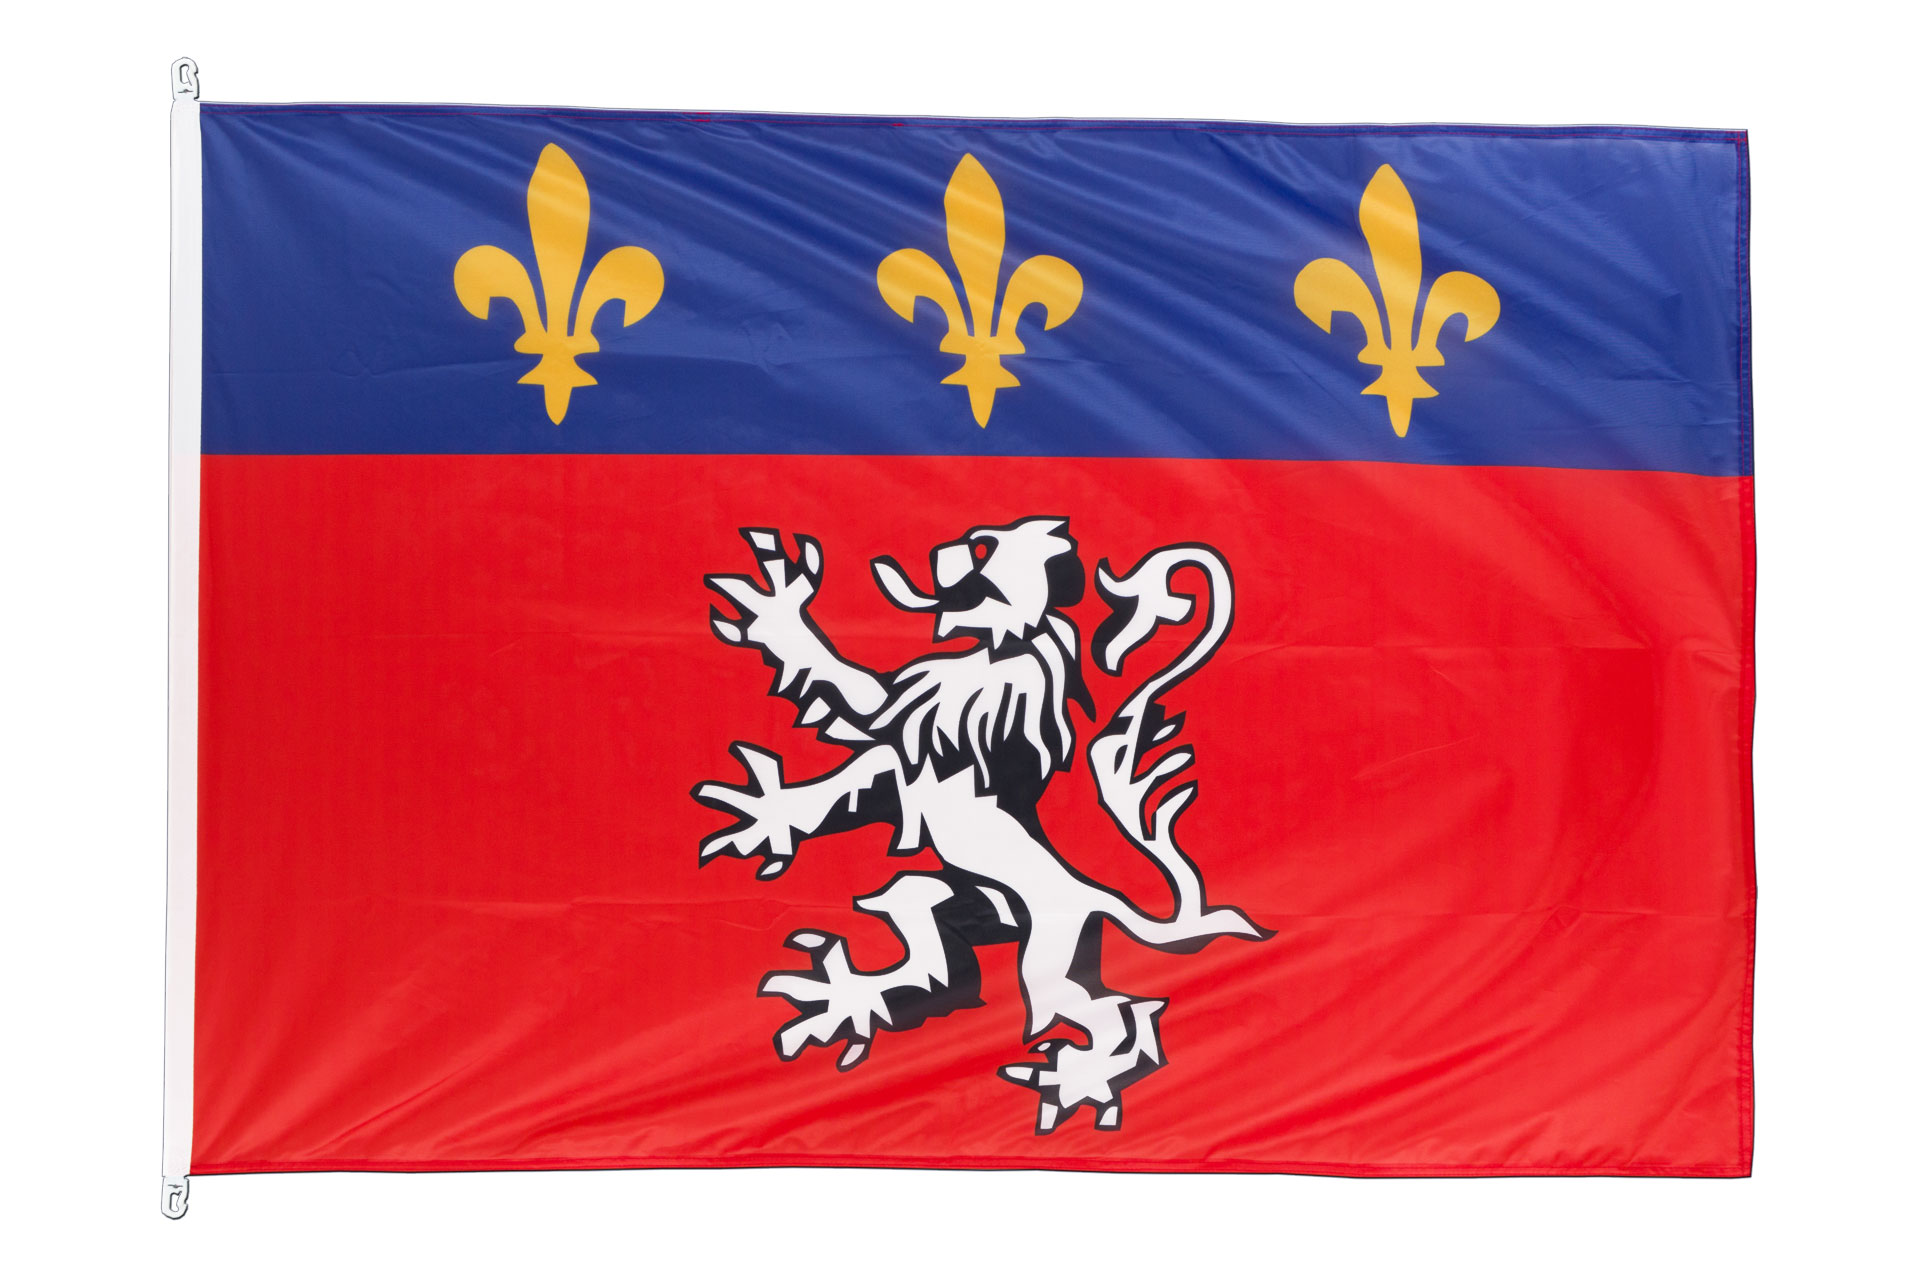 Lyon Flag for Sale - Buy online at Royal-Flags